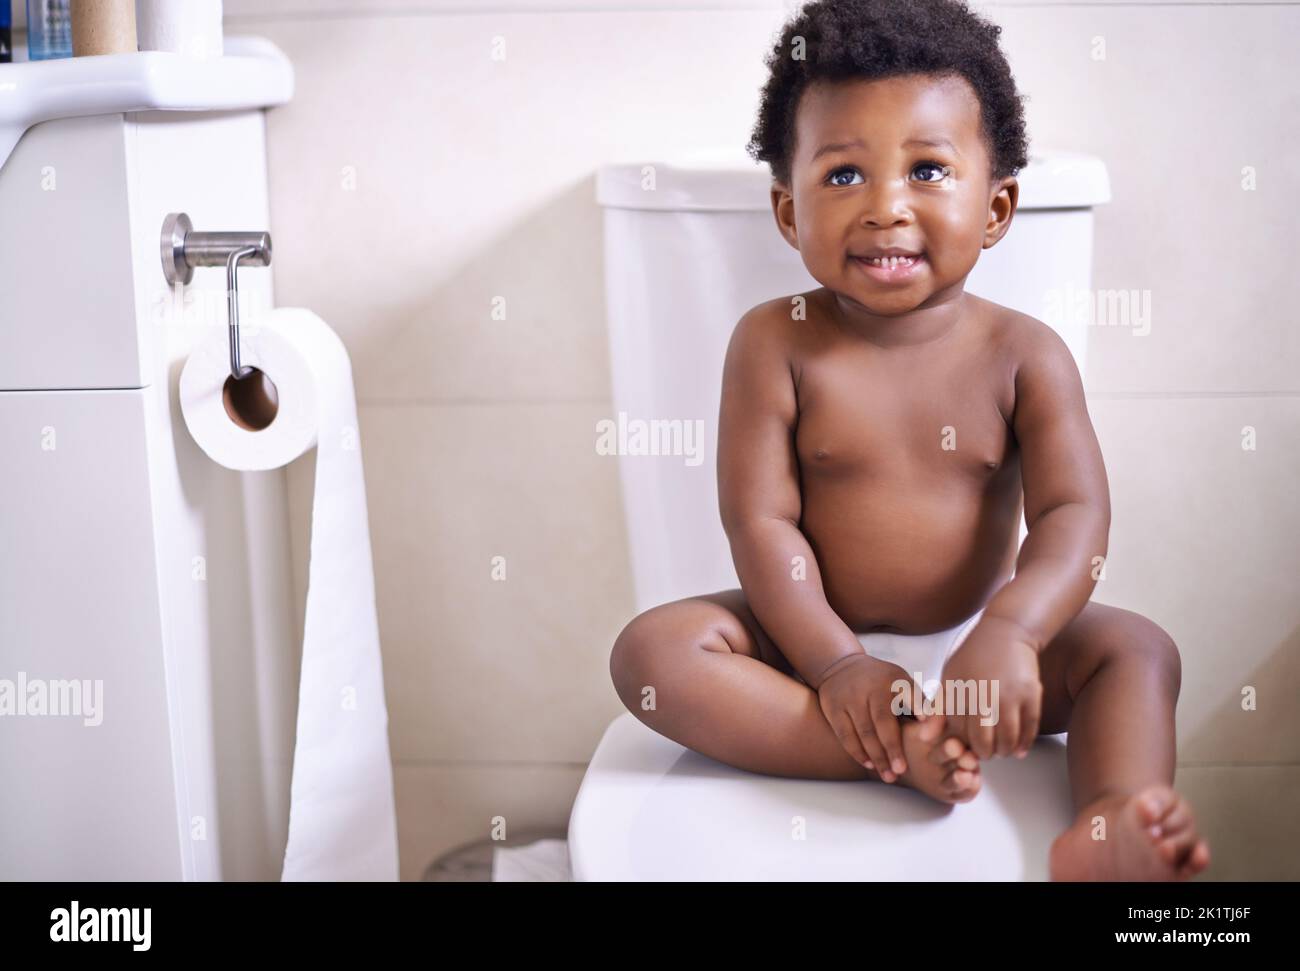 Im ready for my first potty training lesson. an adorable baby boy sitting on the toilet in the bathroom. Stock Photo